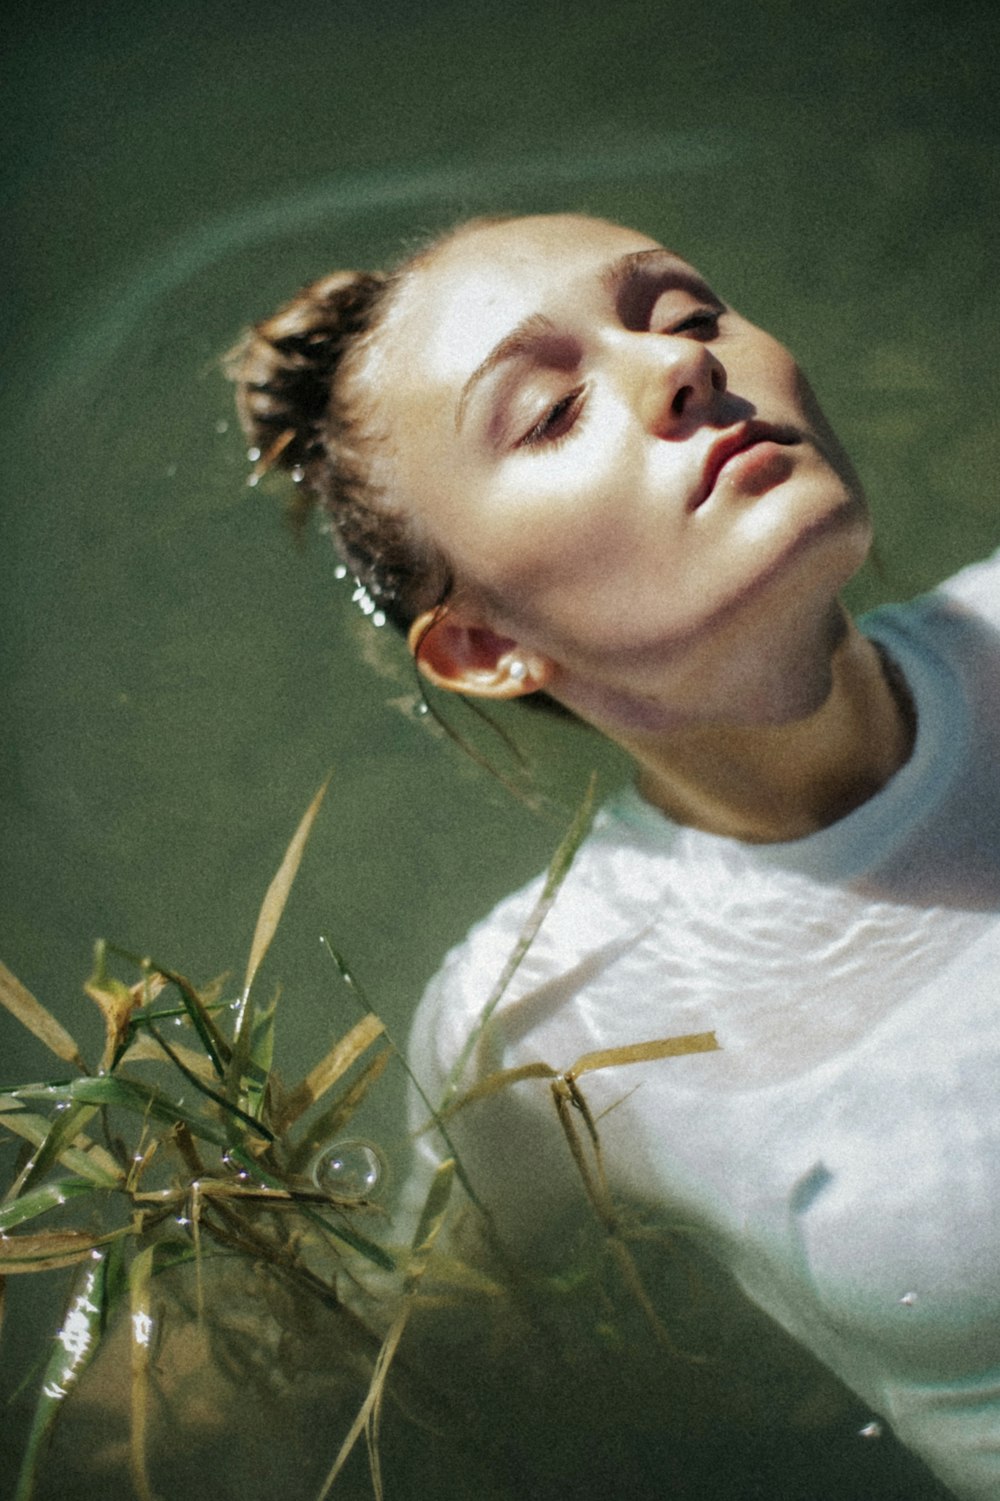 a woman is floating in a body of water